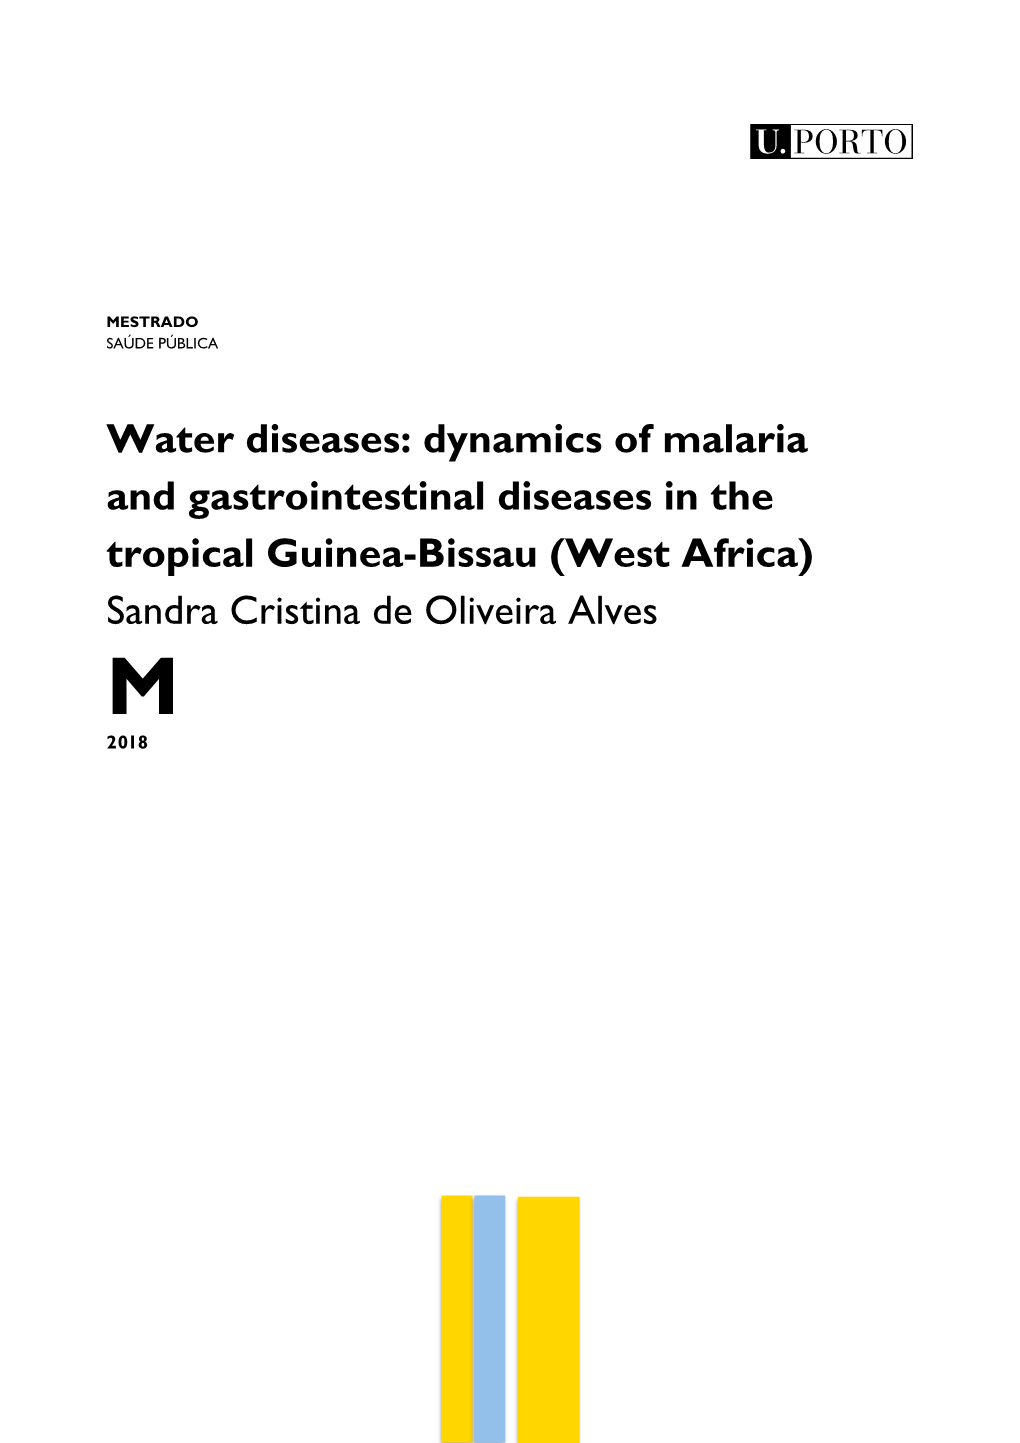 Water Diseases: Dynamics of Malaria and Gastrointestinal Diseases in the Tropical Guinea-Bissau (West Africa) Sandra Cristina De Oliveira Alves M 2018